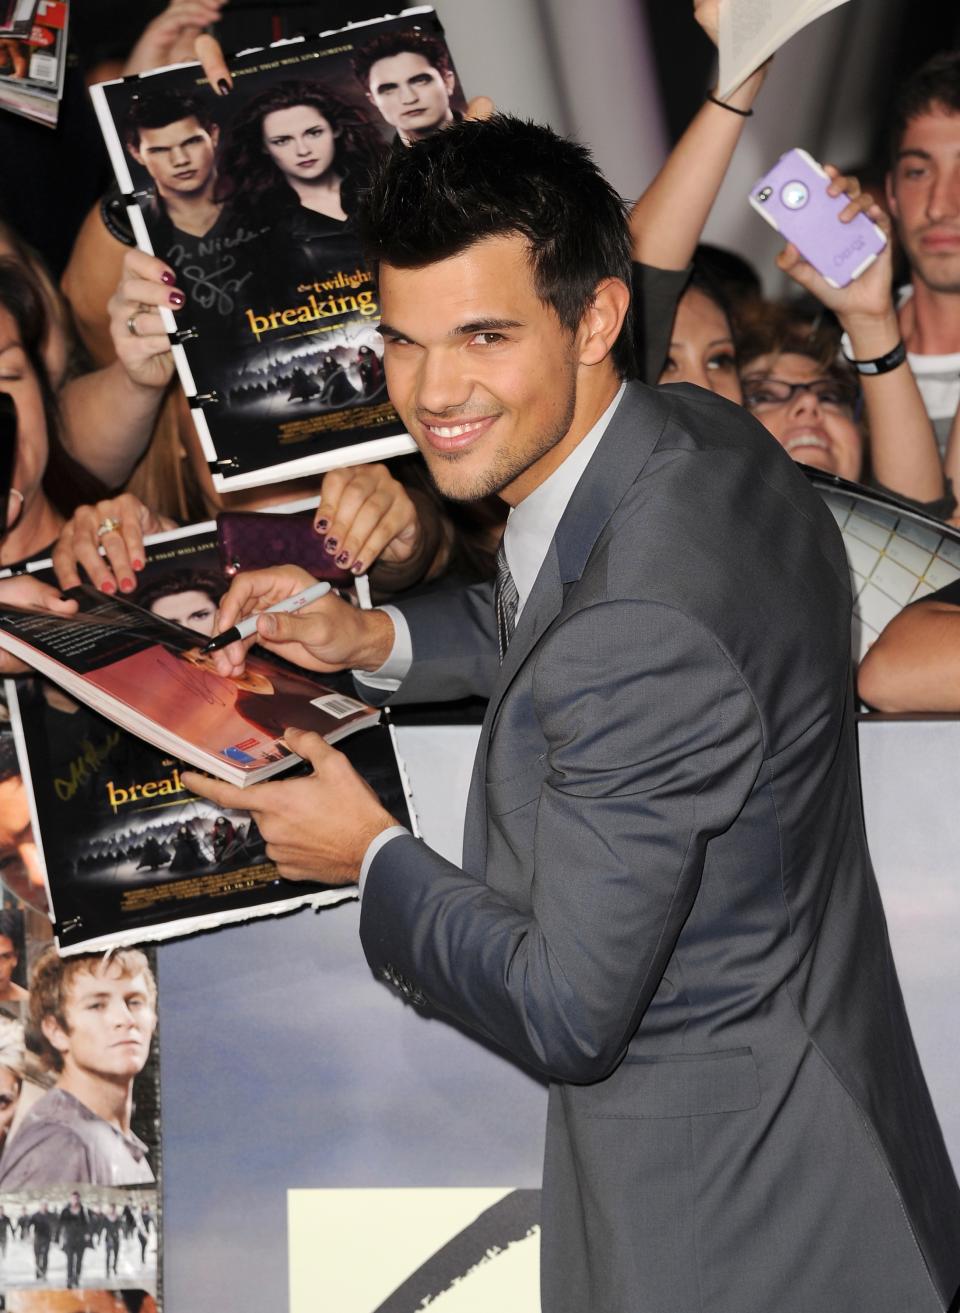 Taylor Lautner arrives at the premiere of Summit Entertainment's 'The Twilight Saga: Breaking Dawn - Part 2' at Nokia Theatre L.A. Live on November 12, 2012 in Los Angeles, California. (Photo by Jason Merritt/Getty Images)